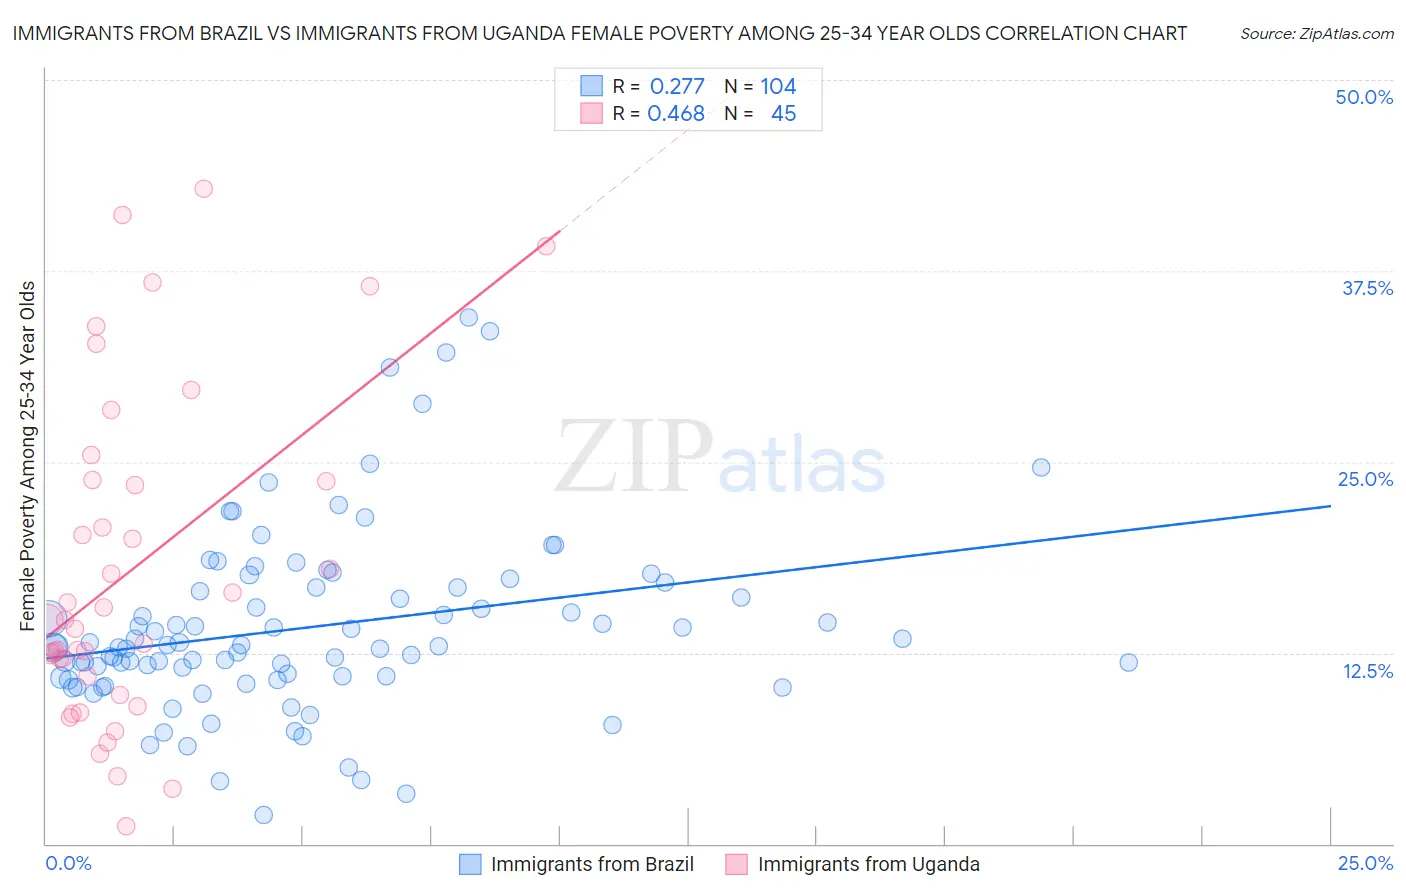 Immigrants from Brazil vs Immigrants from Uganda Female Poverty Among 25-34 Year Olds